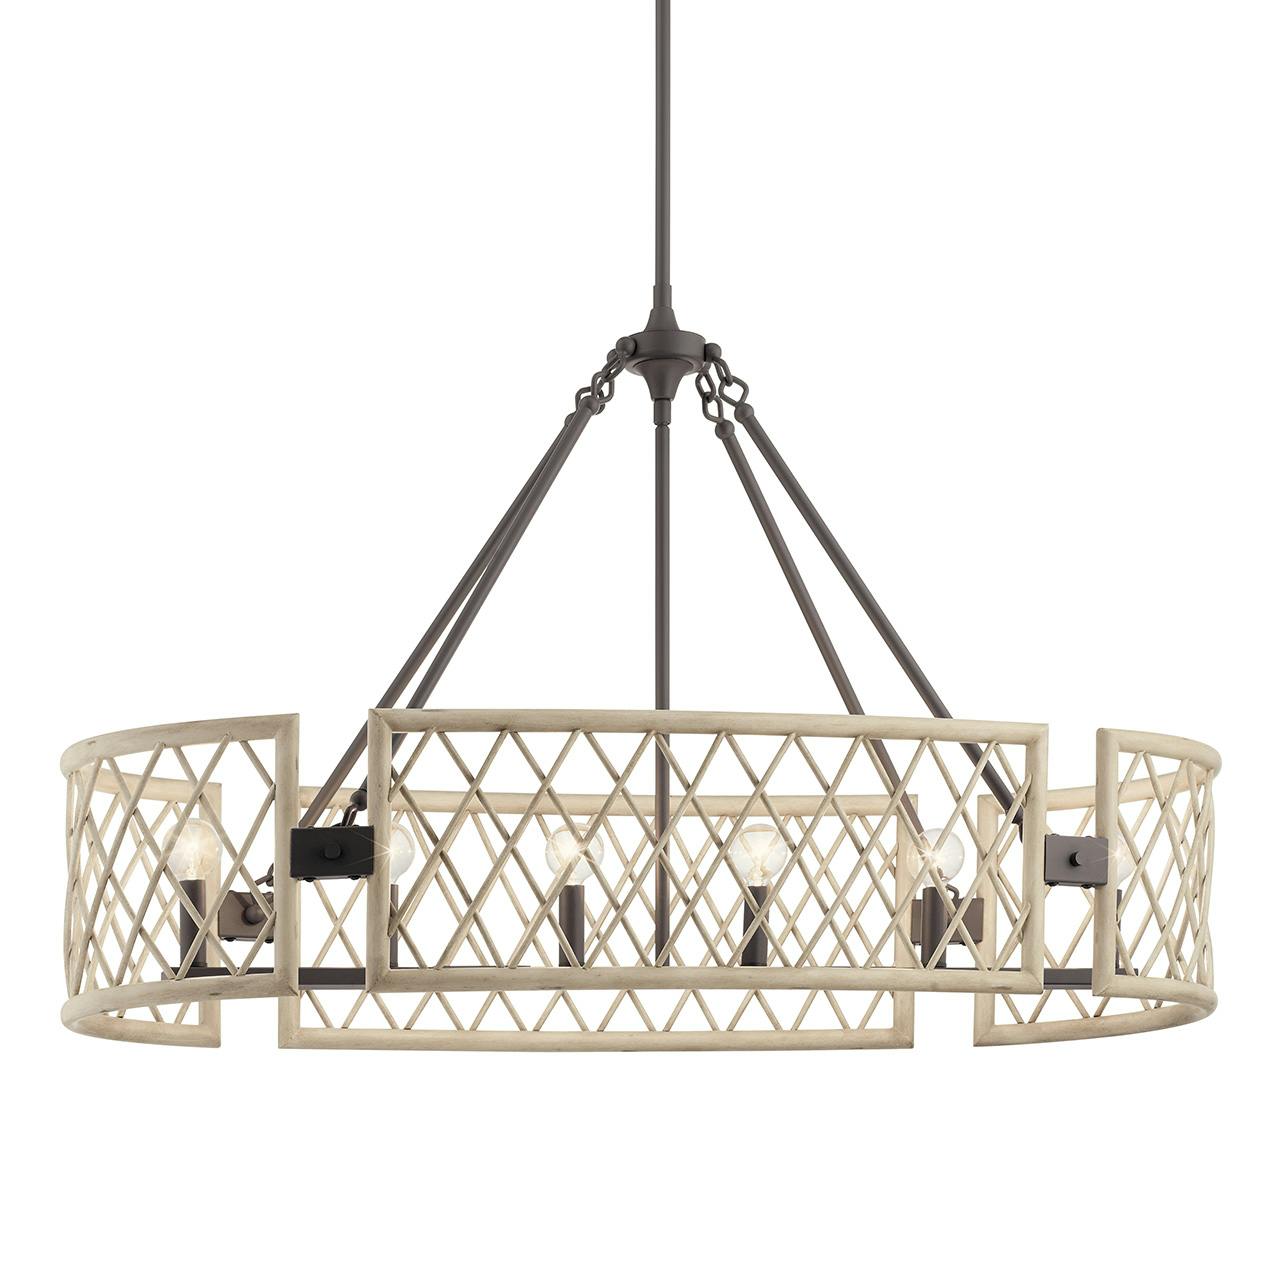 Oana 6 Light Oval Chandelier White Washed without the canopy on a white background